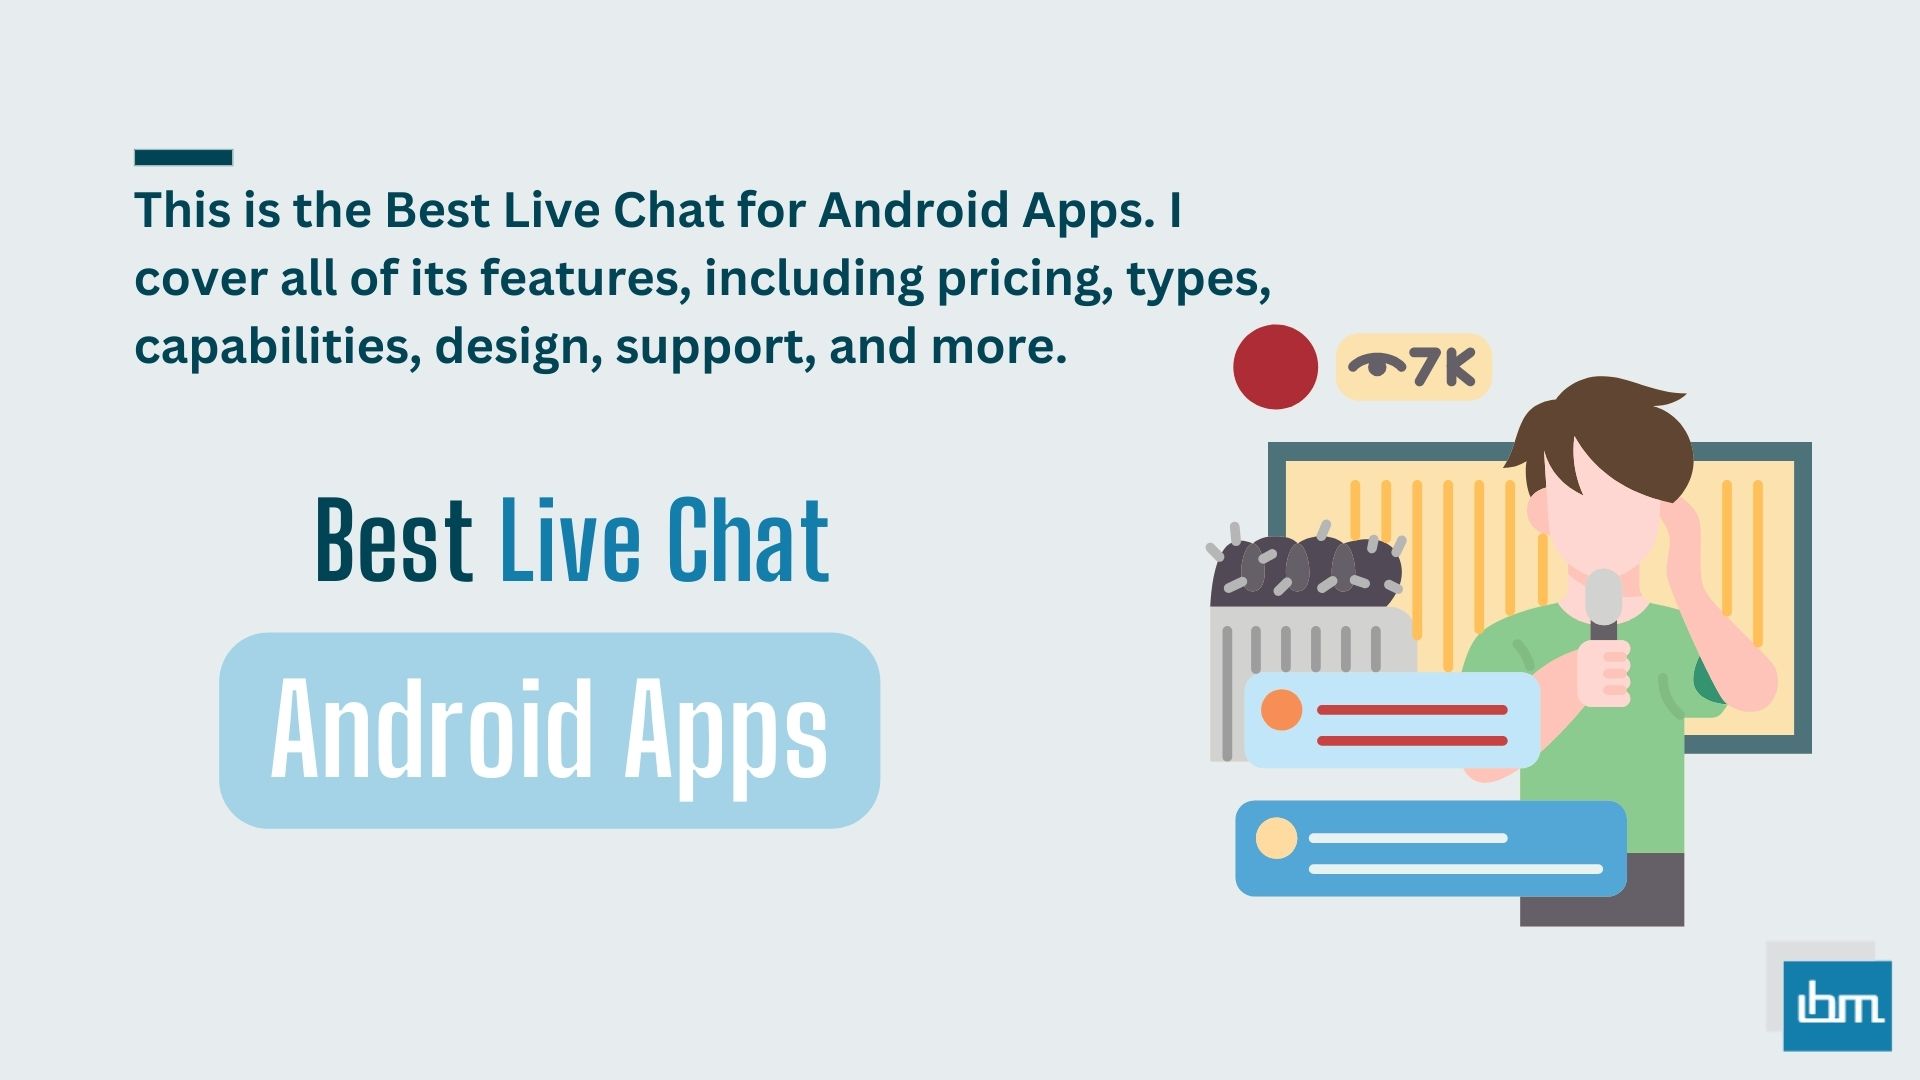 Best Live Chat for Android Apps